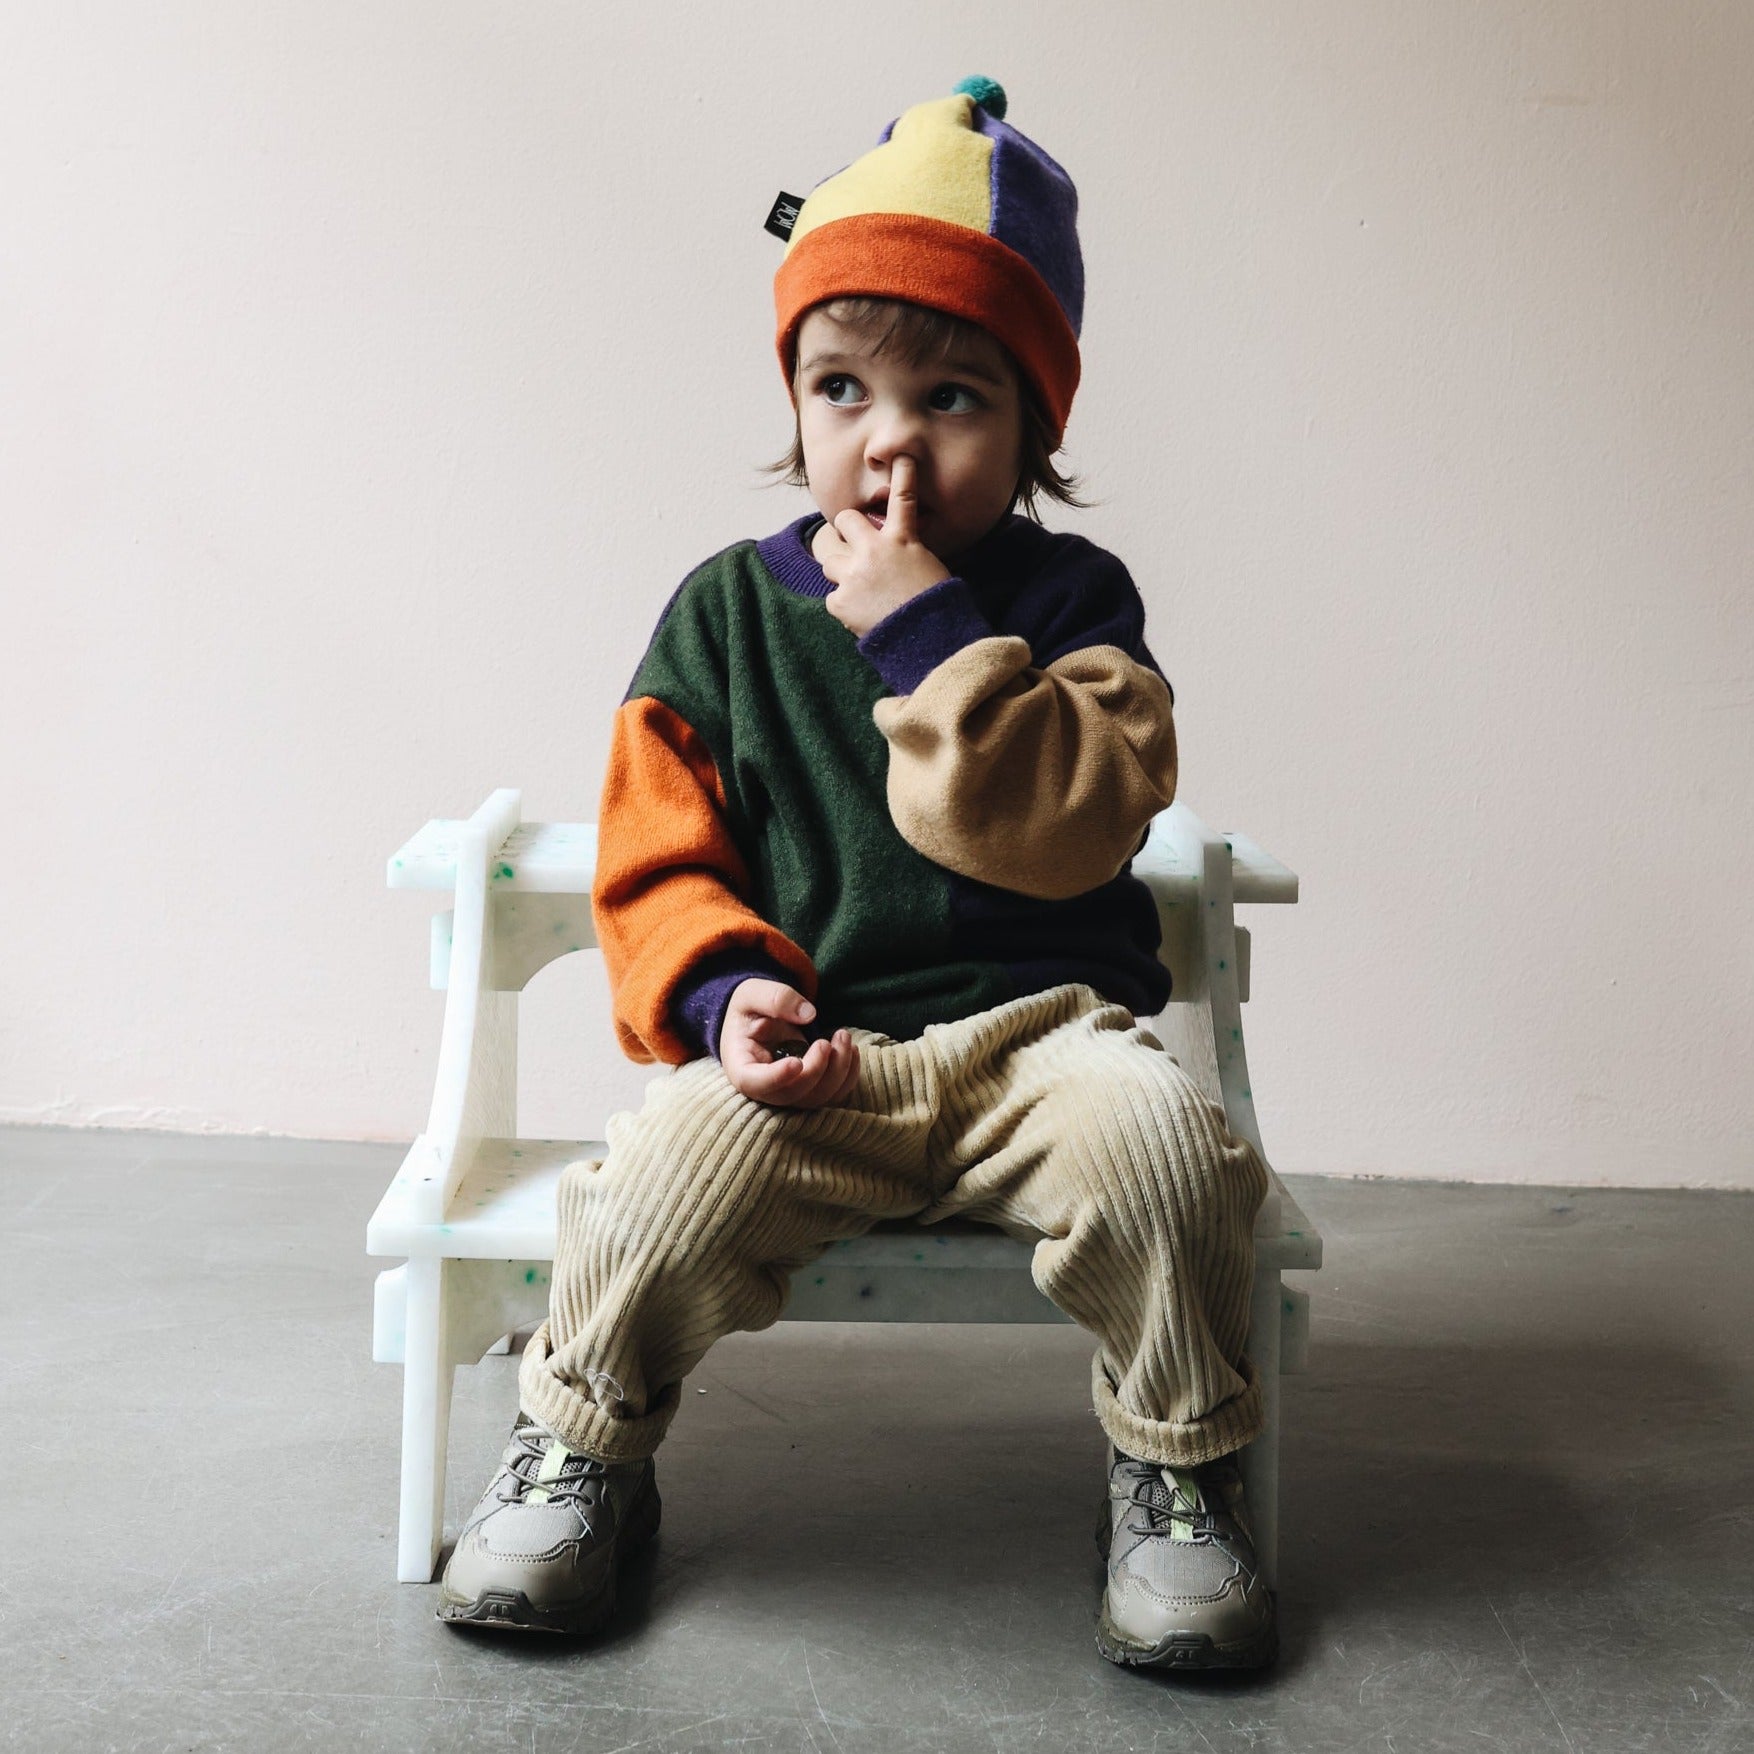 KID PICKING NOSE SITTING ON WHITE SMALL STEP STOOL BY THE MINIMONO PROJECT - BRAND FOR ECO FRIENDLY - PLAYFUL - MULTI FUNCTIONAL - SUSTAINABLE - HIGH QUALITY - DESIGN FURNITURE FROM RECYCLED PLASTIC FOR BOTH ADULT AND CHILDREN MADE IN BERLIN GERMANY